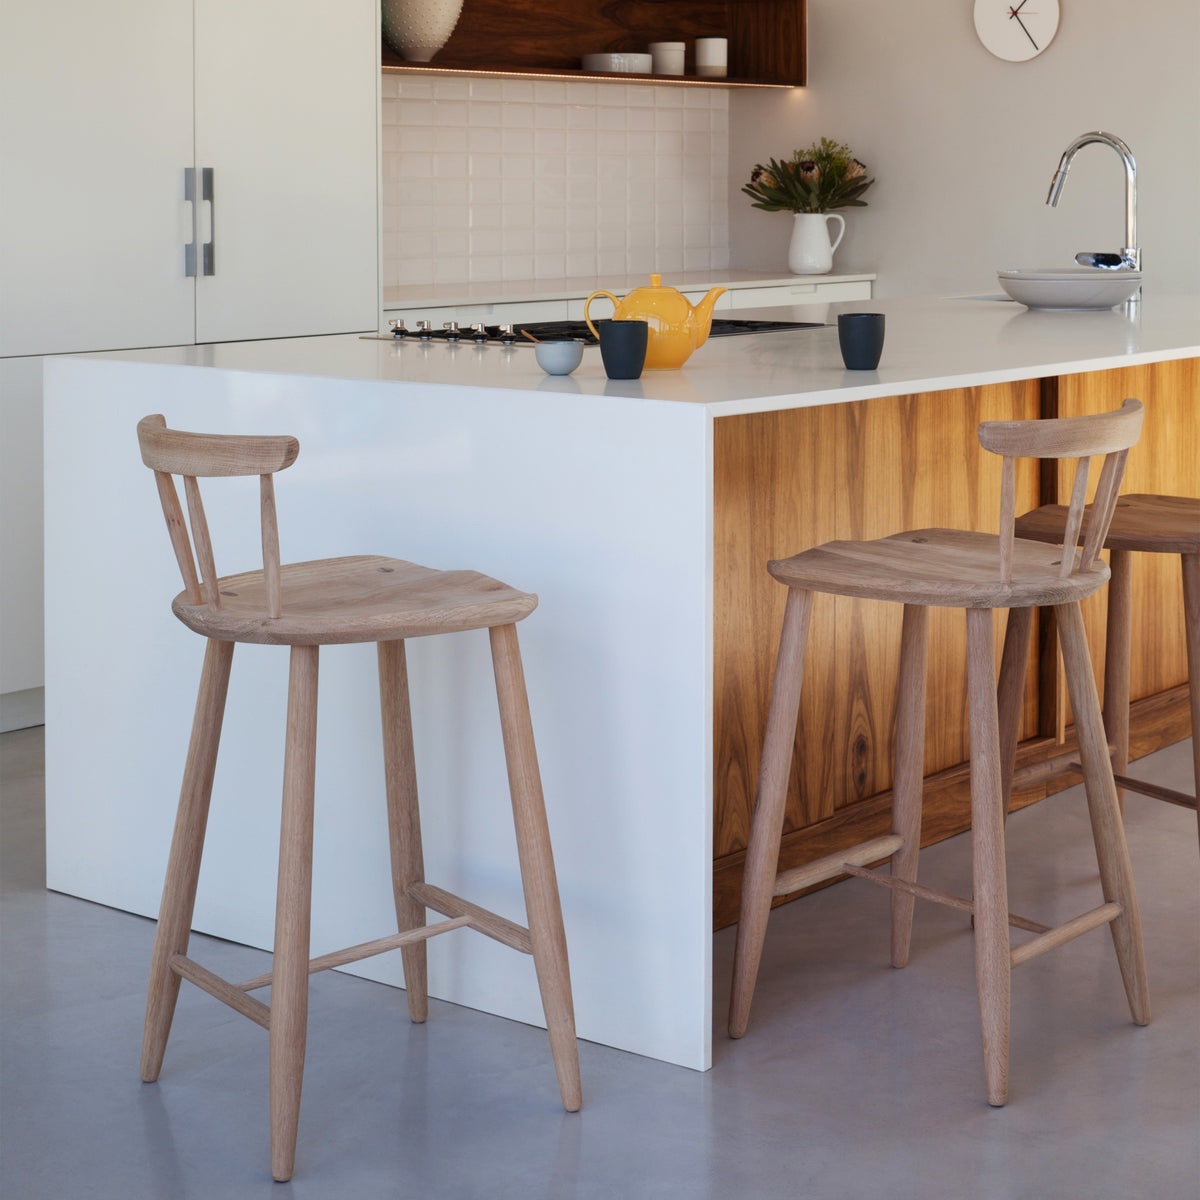 Stool with Backrest by Houtlander - Always Welcome Store